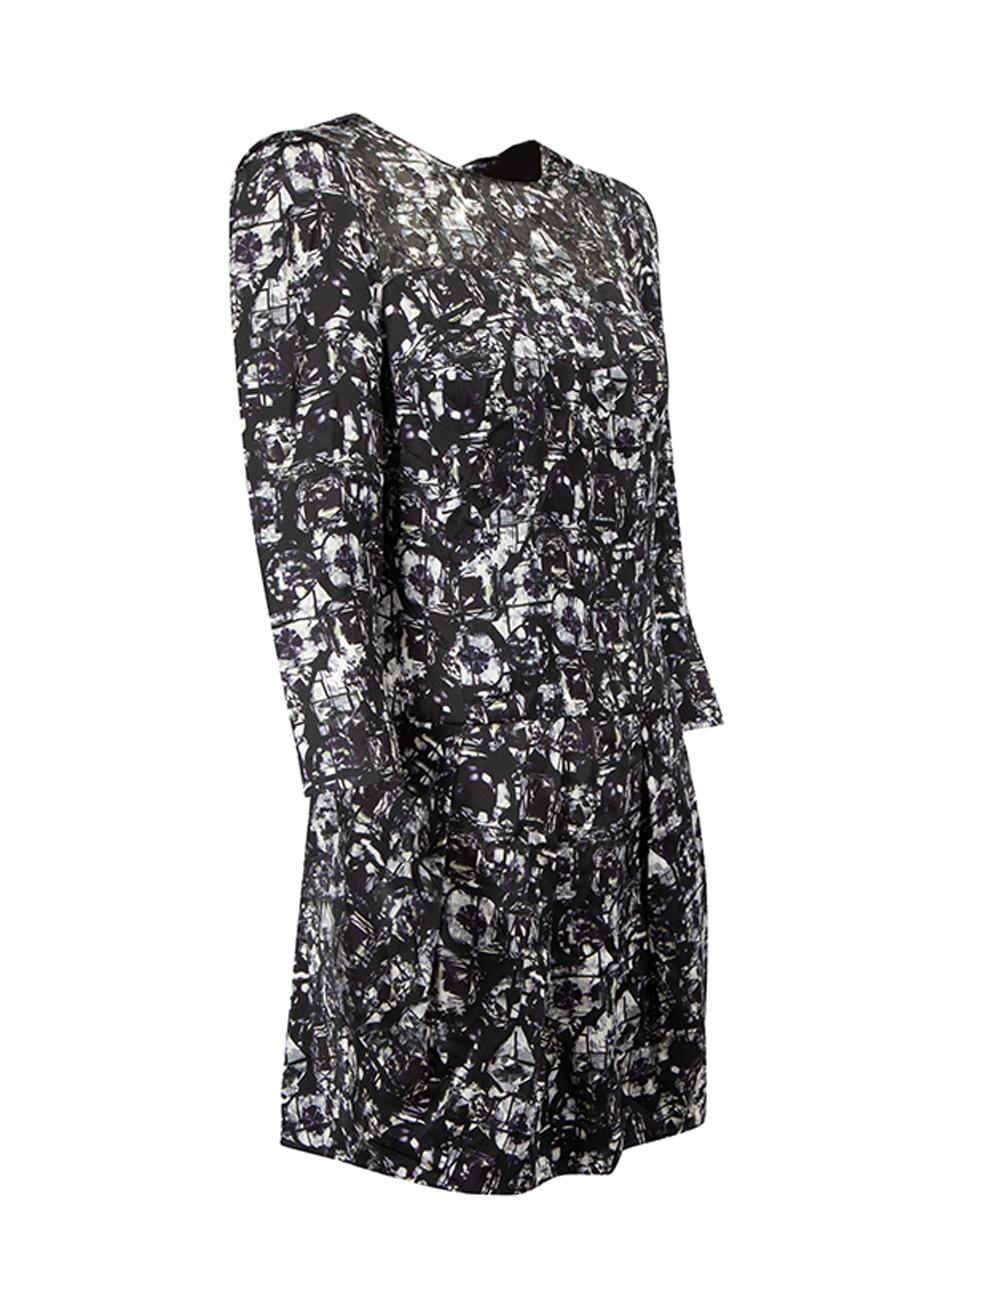 CONDITION is Never worn, with tags. No visible wear to dress is evident on this new Mulberry designer resale item. 



Details


Black

Silk

Mini dress

Broken gem print pattern

Round neckline

Back zip closure





Made in